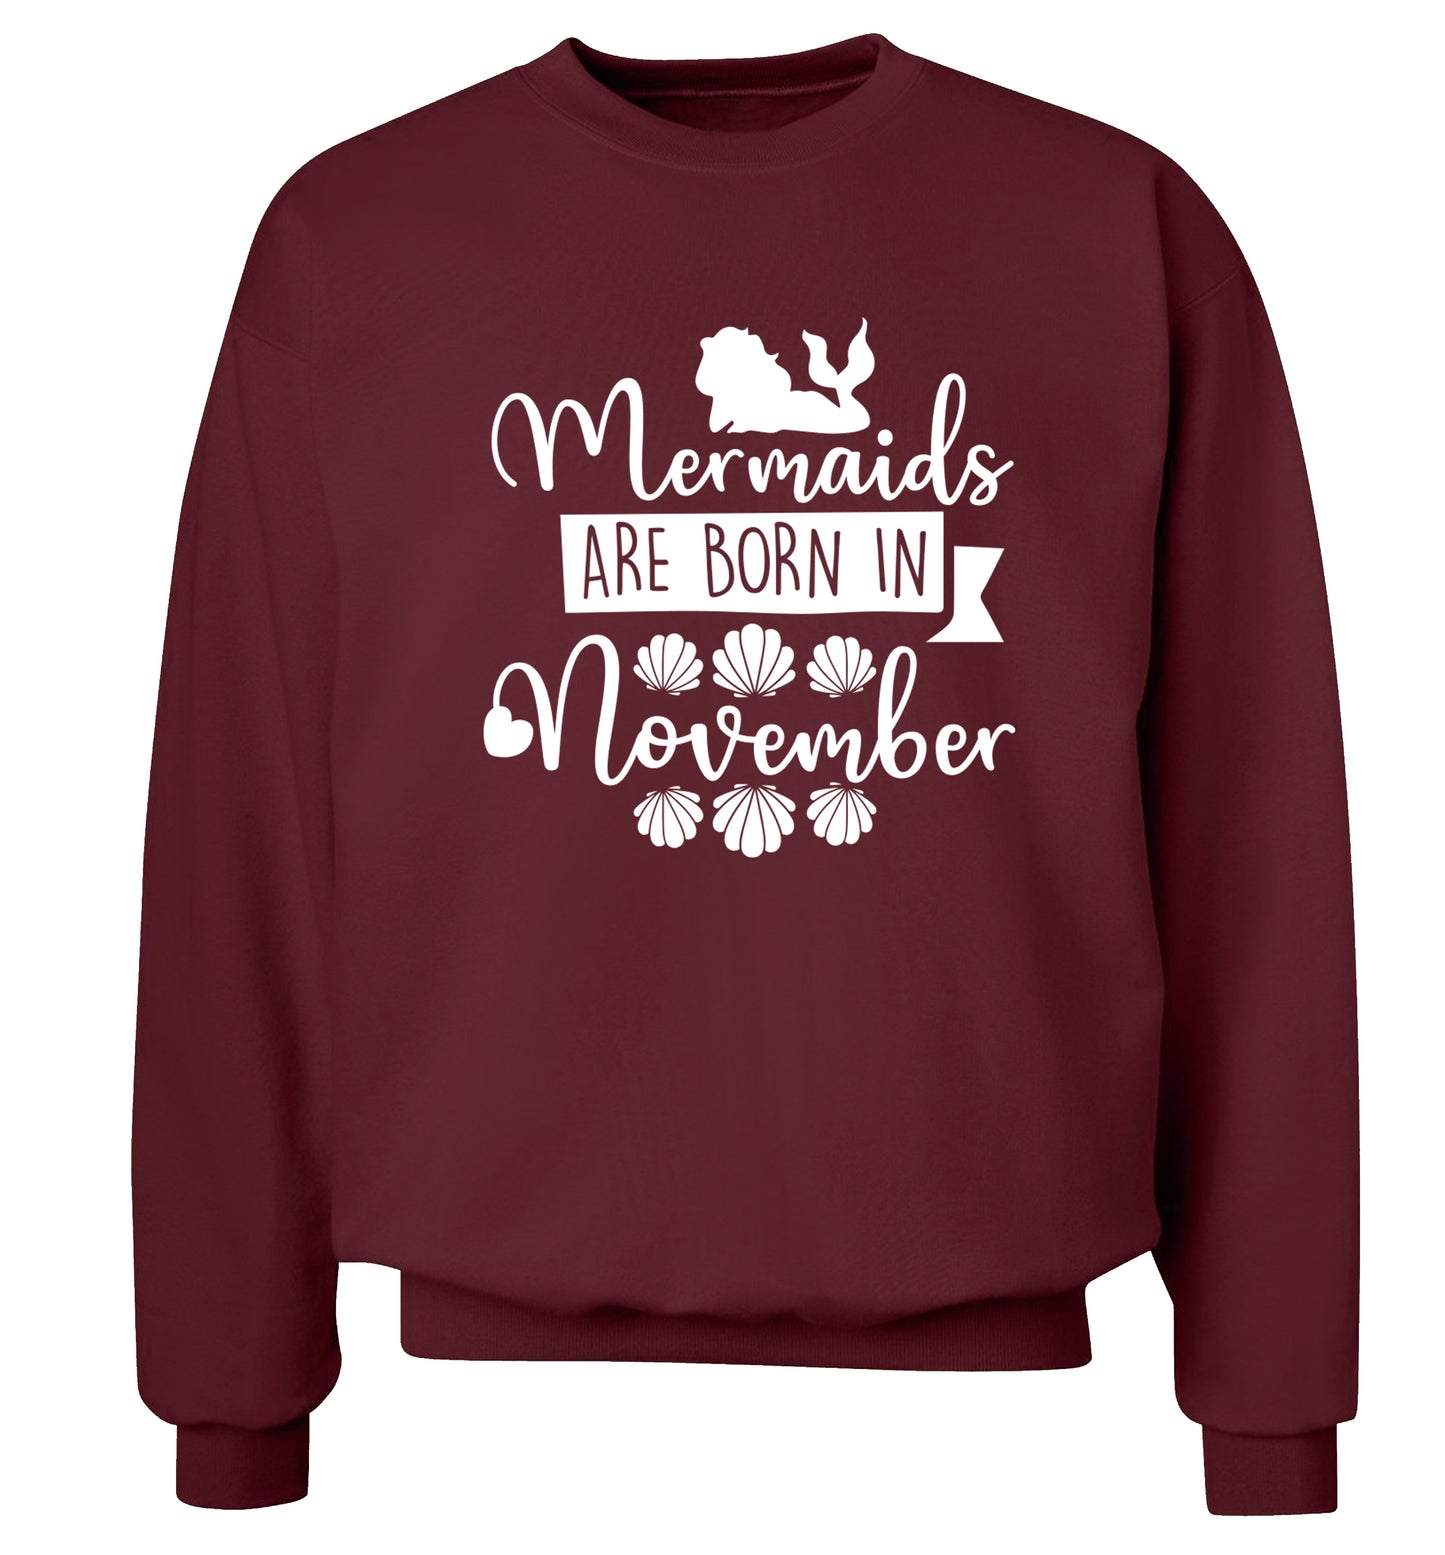 Mermaids are born in November Adult's unisex maroon Sweater 2XL